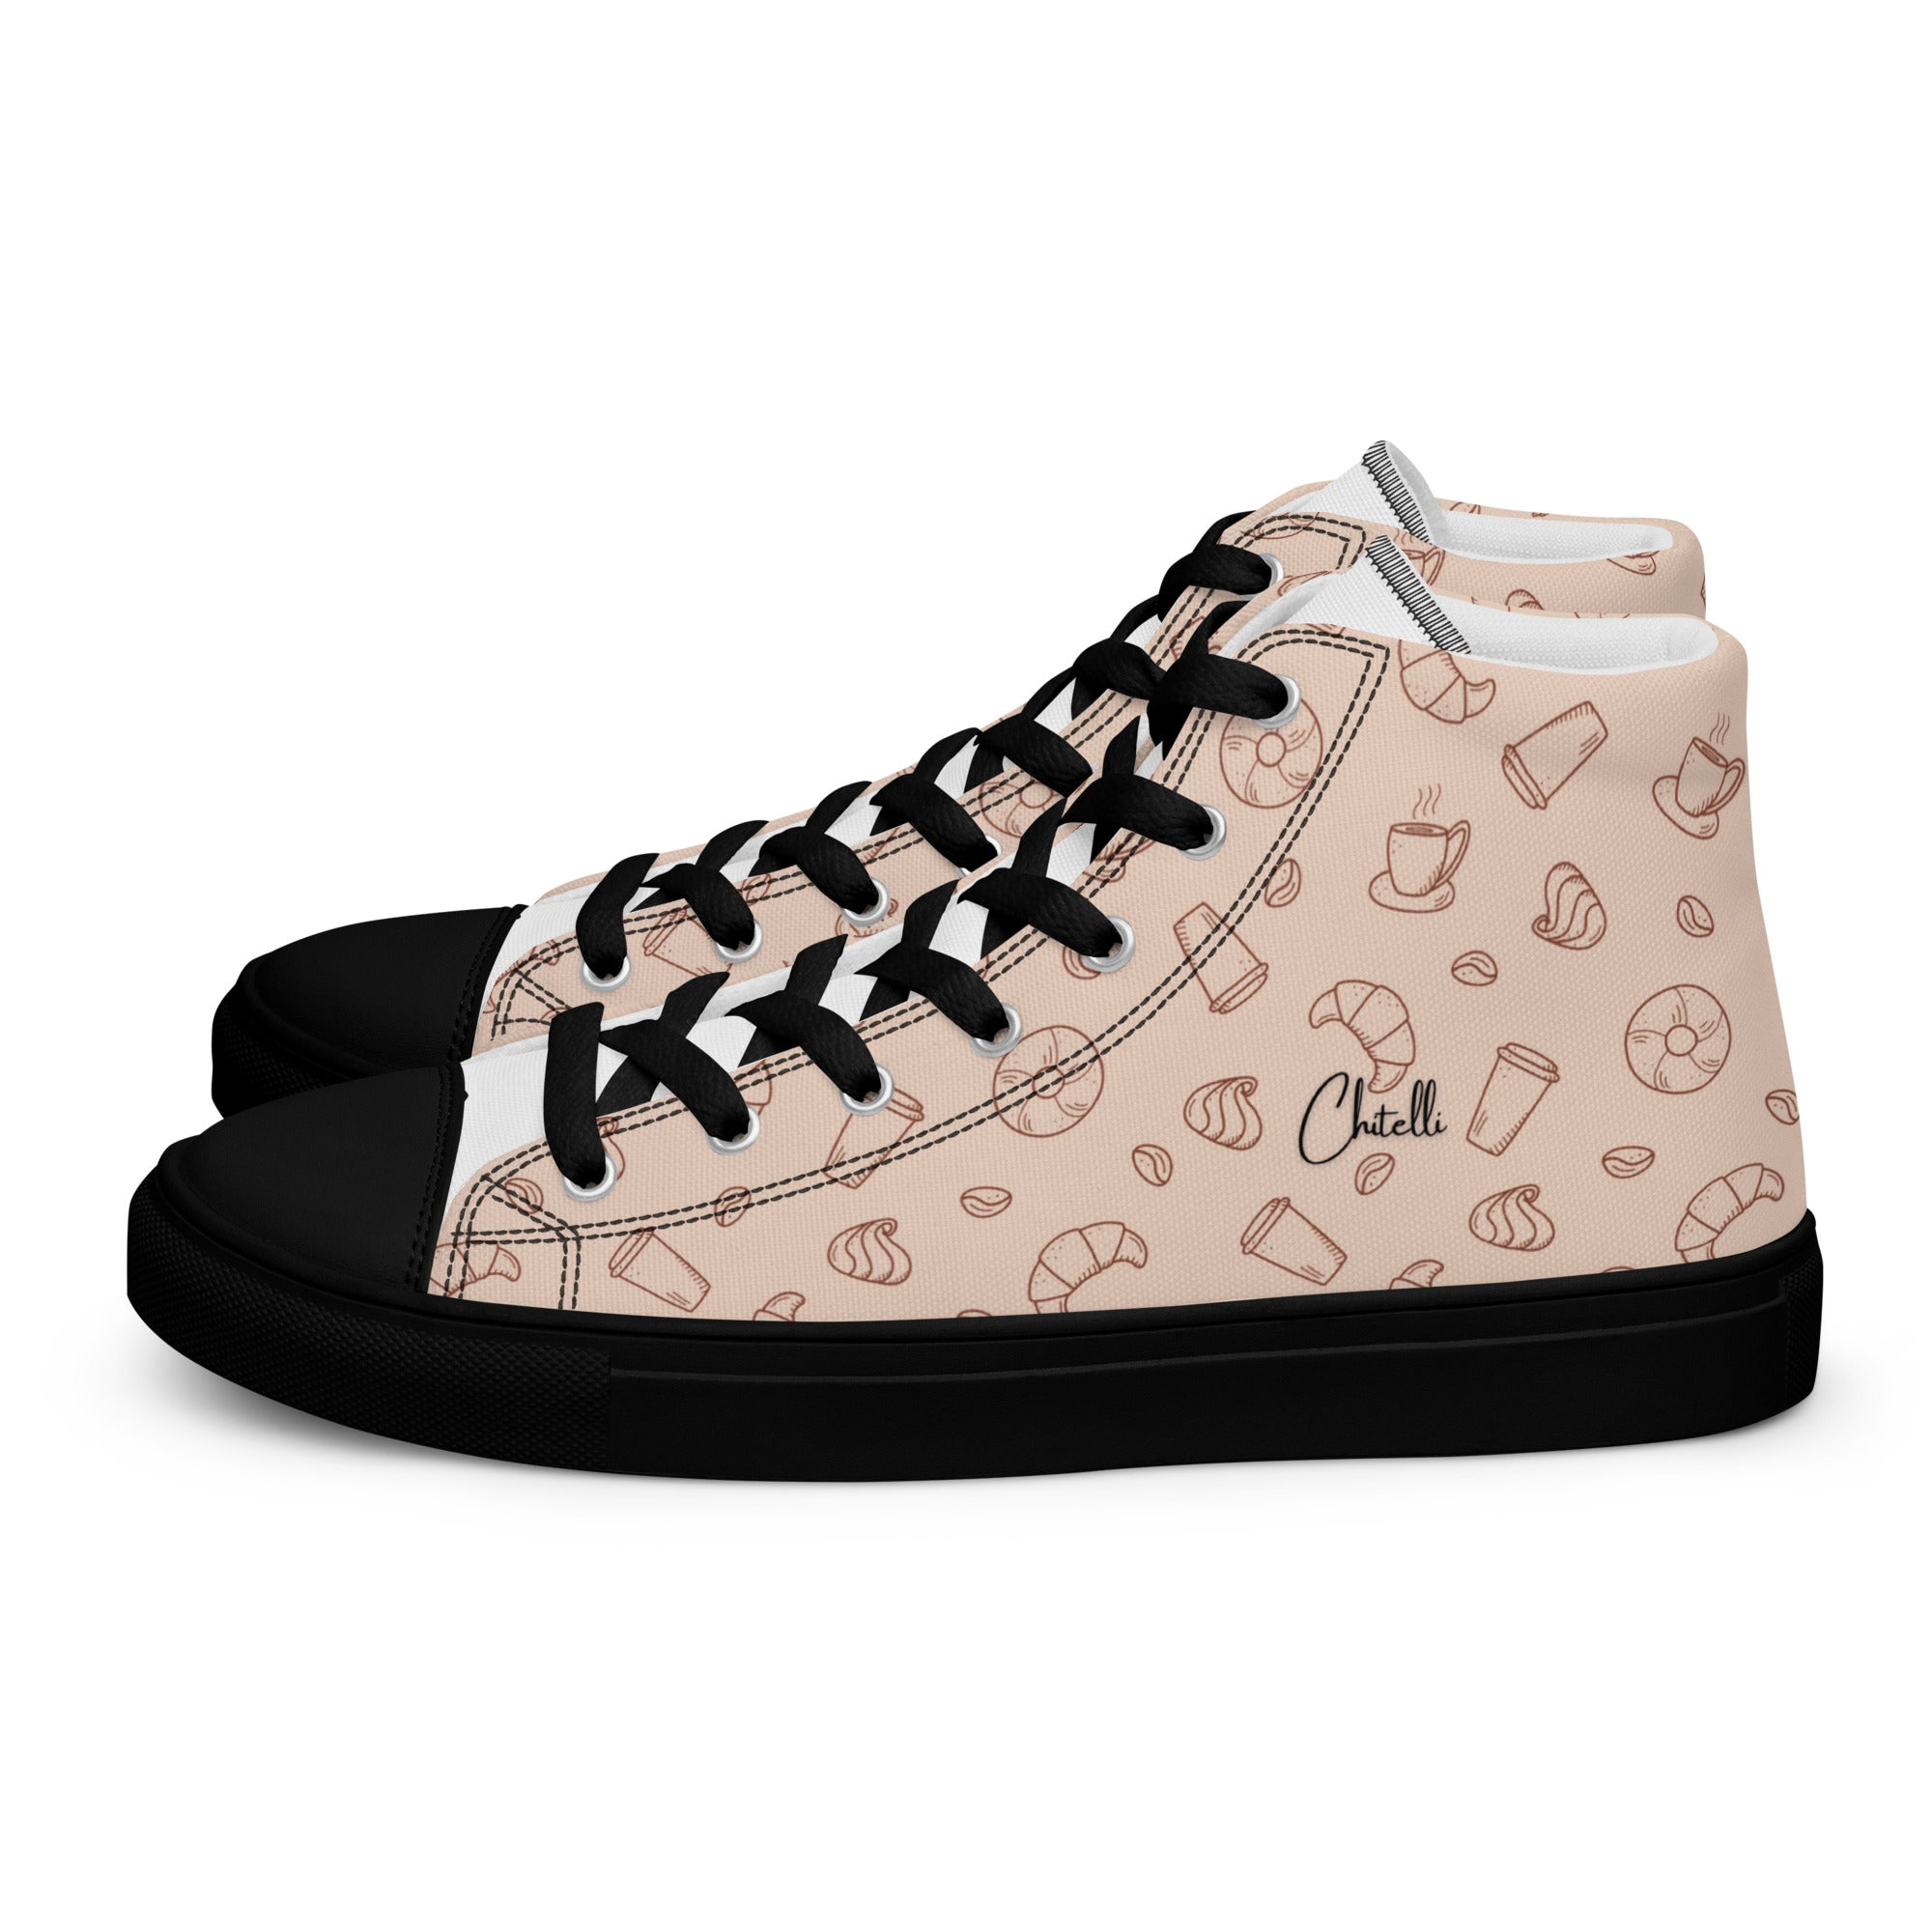 Chitelli's Coffee & Pastries Women's High Top Shoes